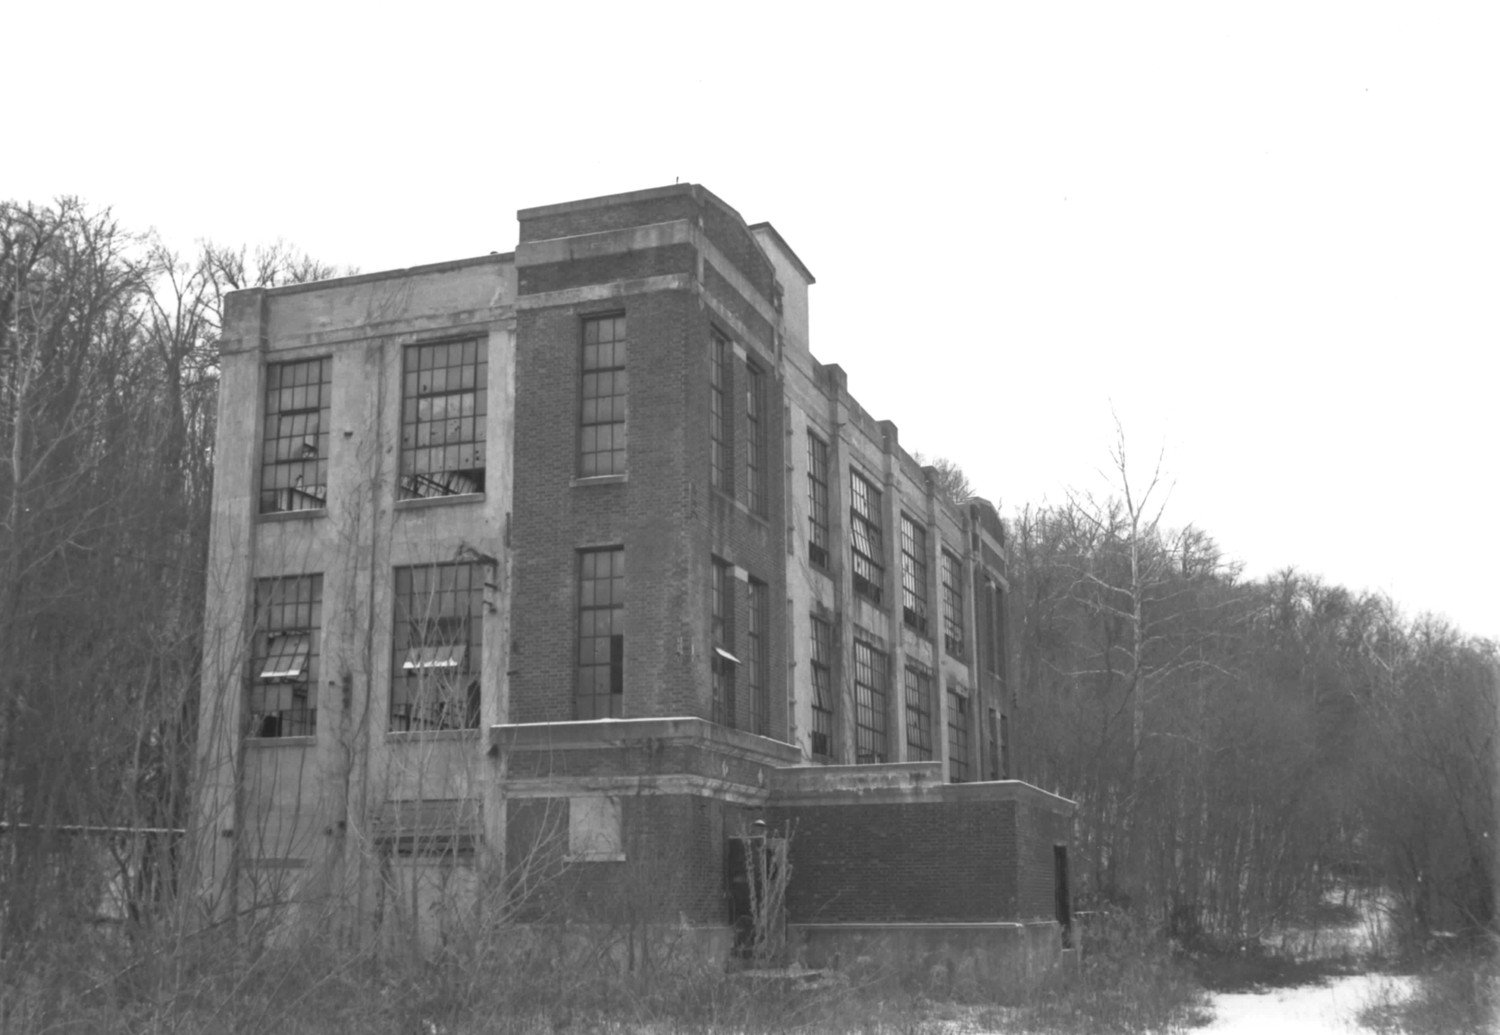 Peters Cartridge Company - Remington Arms, Kings Mills Ohio Building #6 perspective from the northeast (1985)